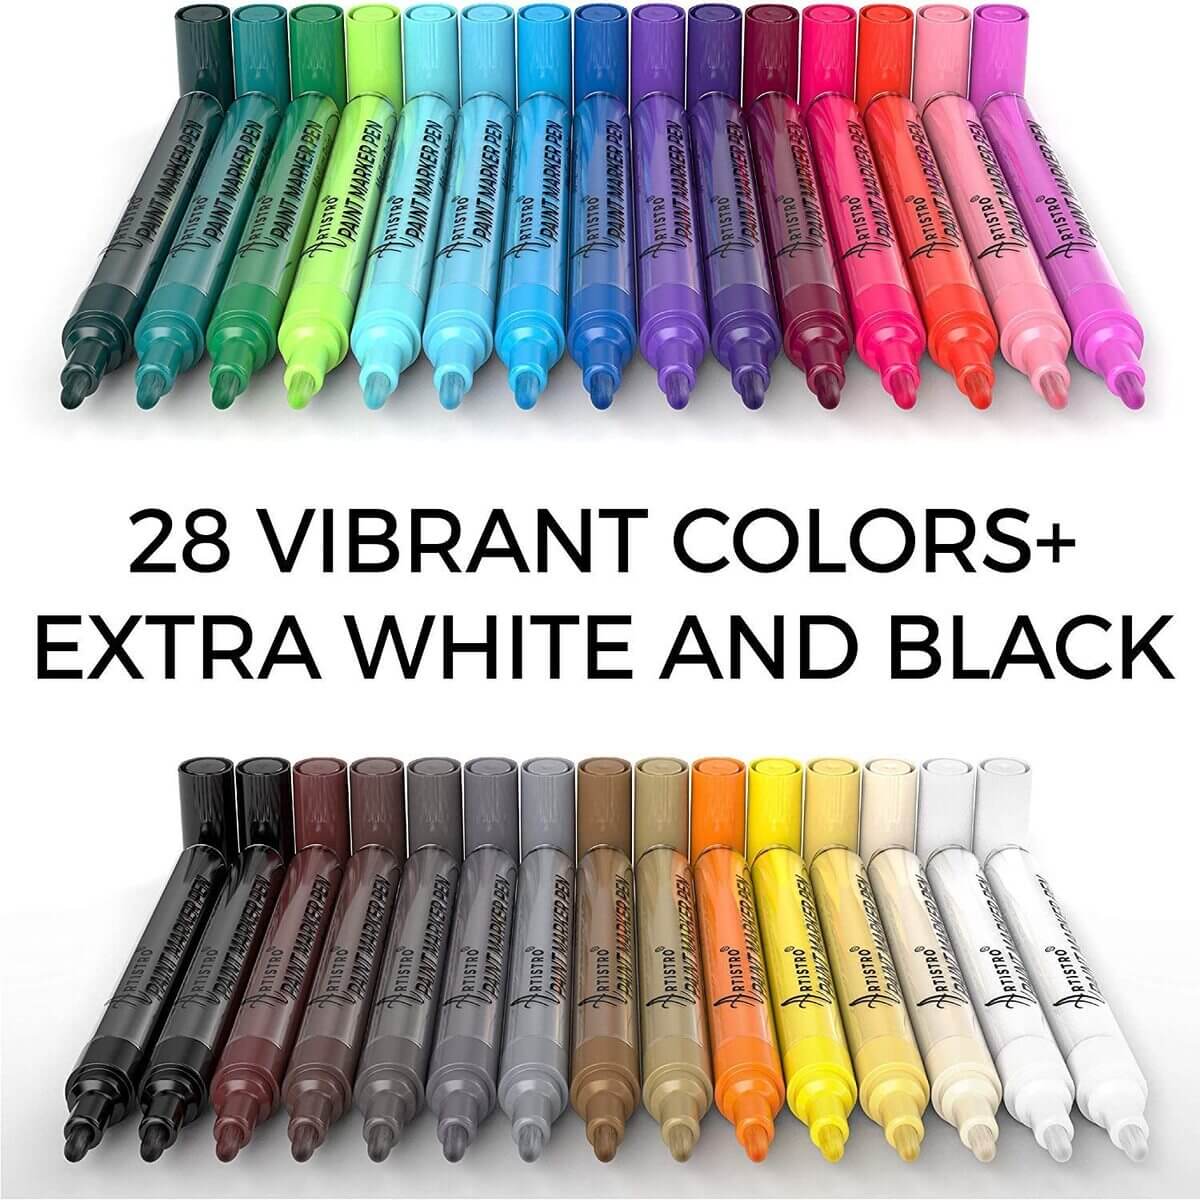 28 vibrant colors + extra white and black